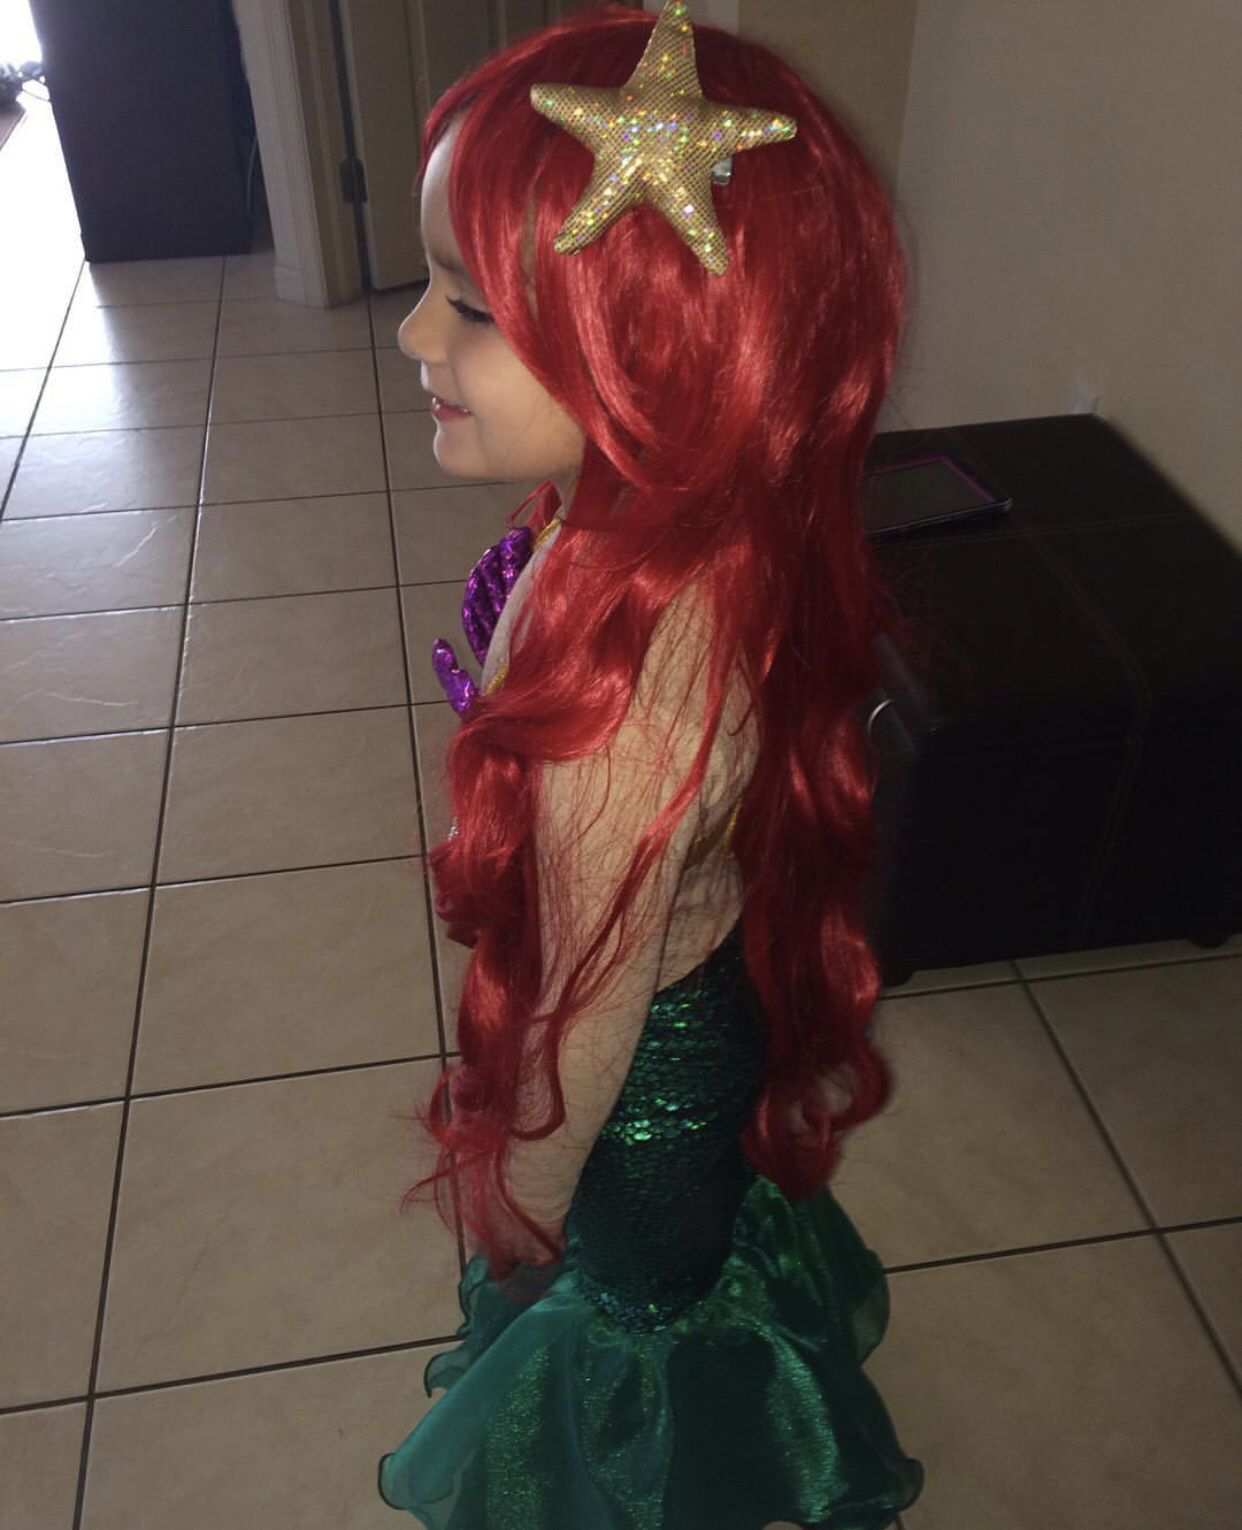 High end little mermaid costume 6-8 years old fit payed 150